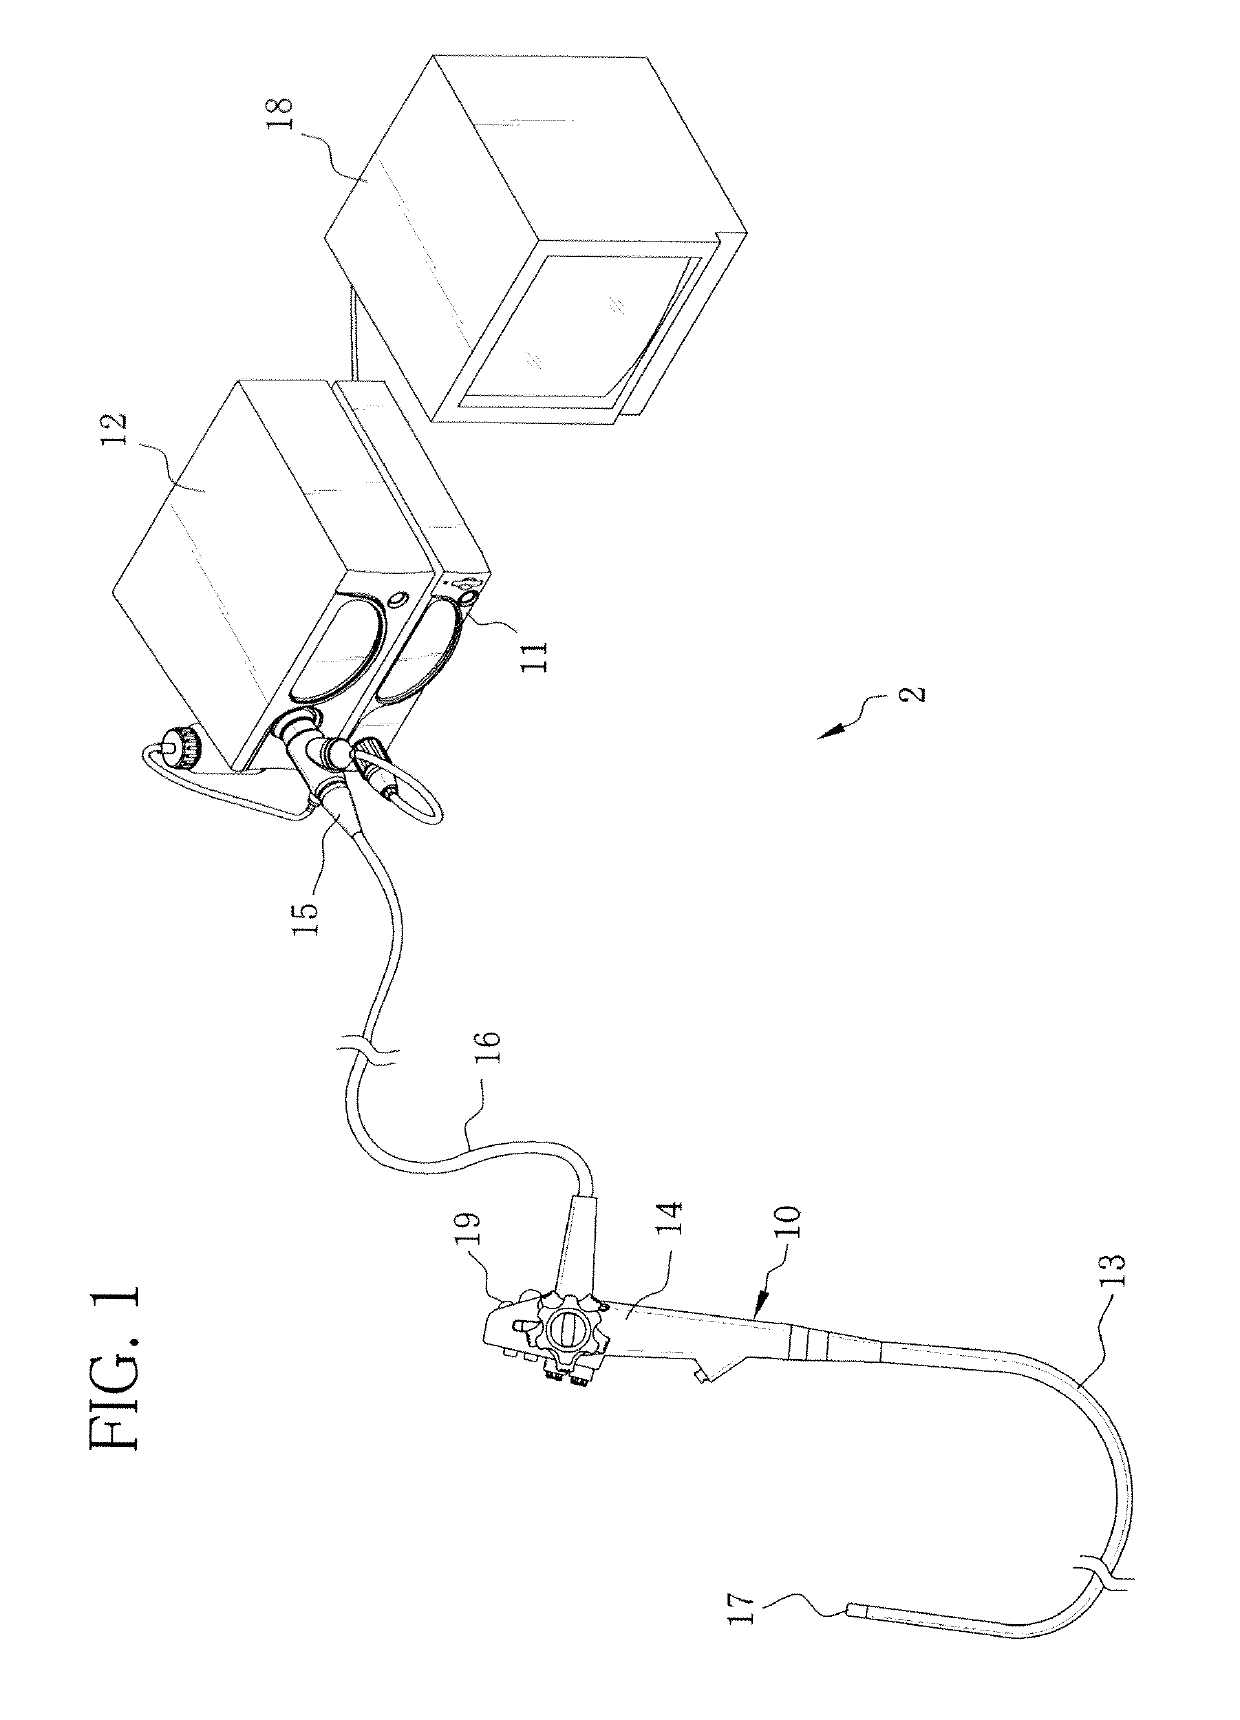 Blood information measuring apparatus and method